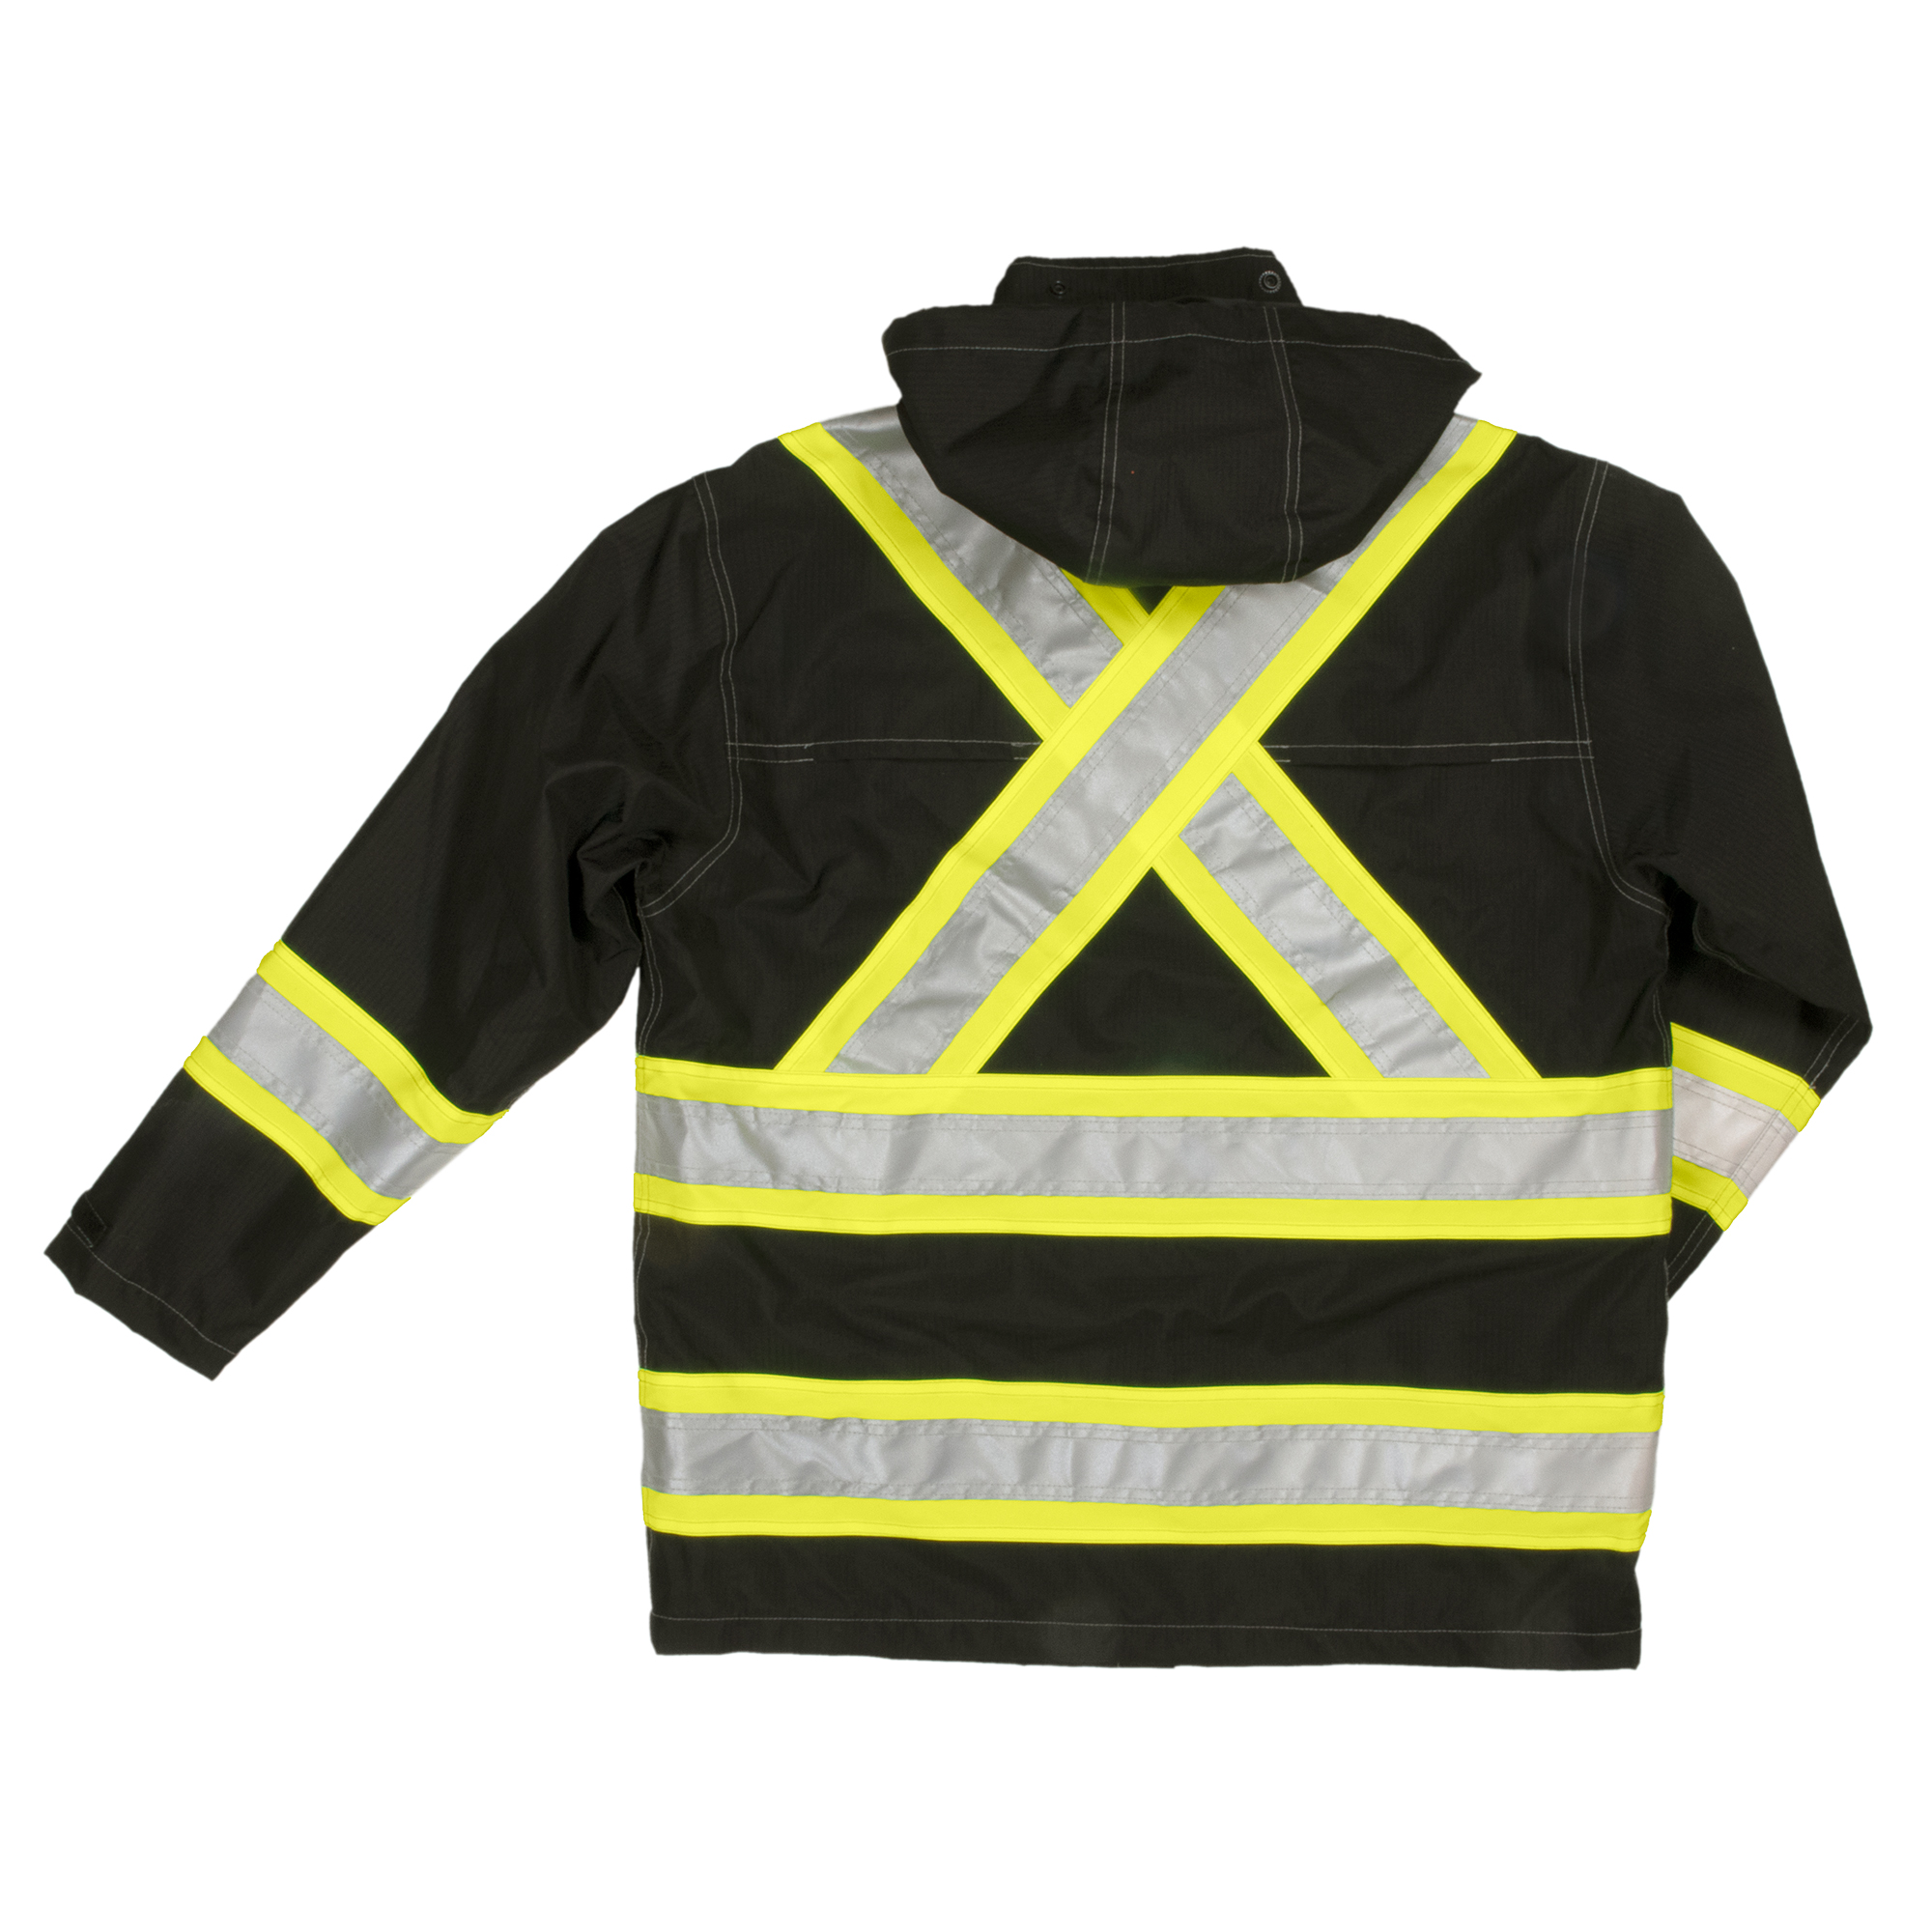 Picture of Tough Duck S372 SAFETY RAIN JACKET